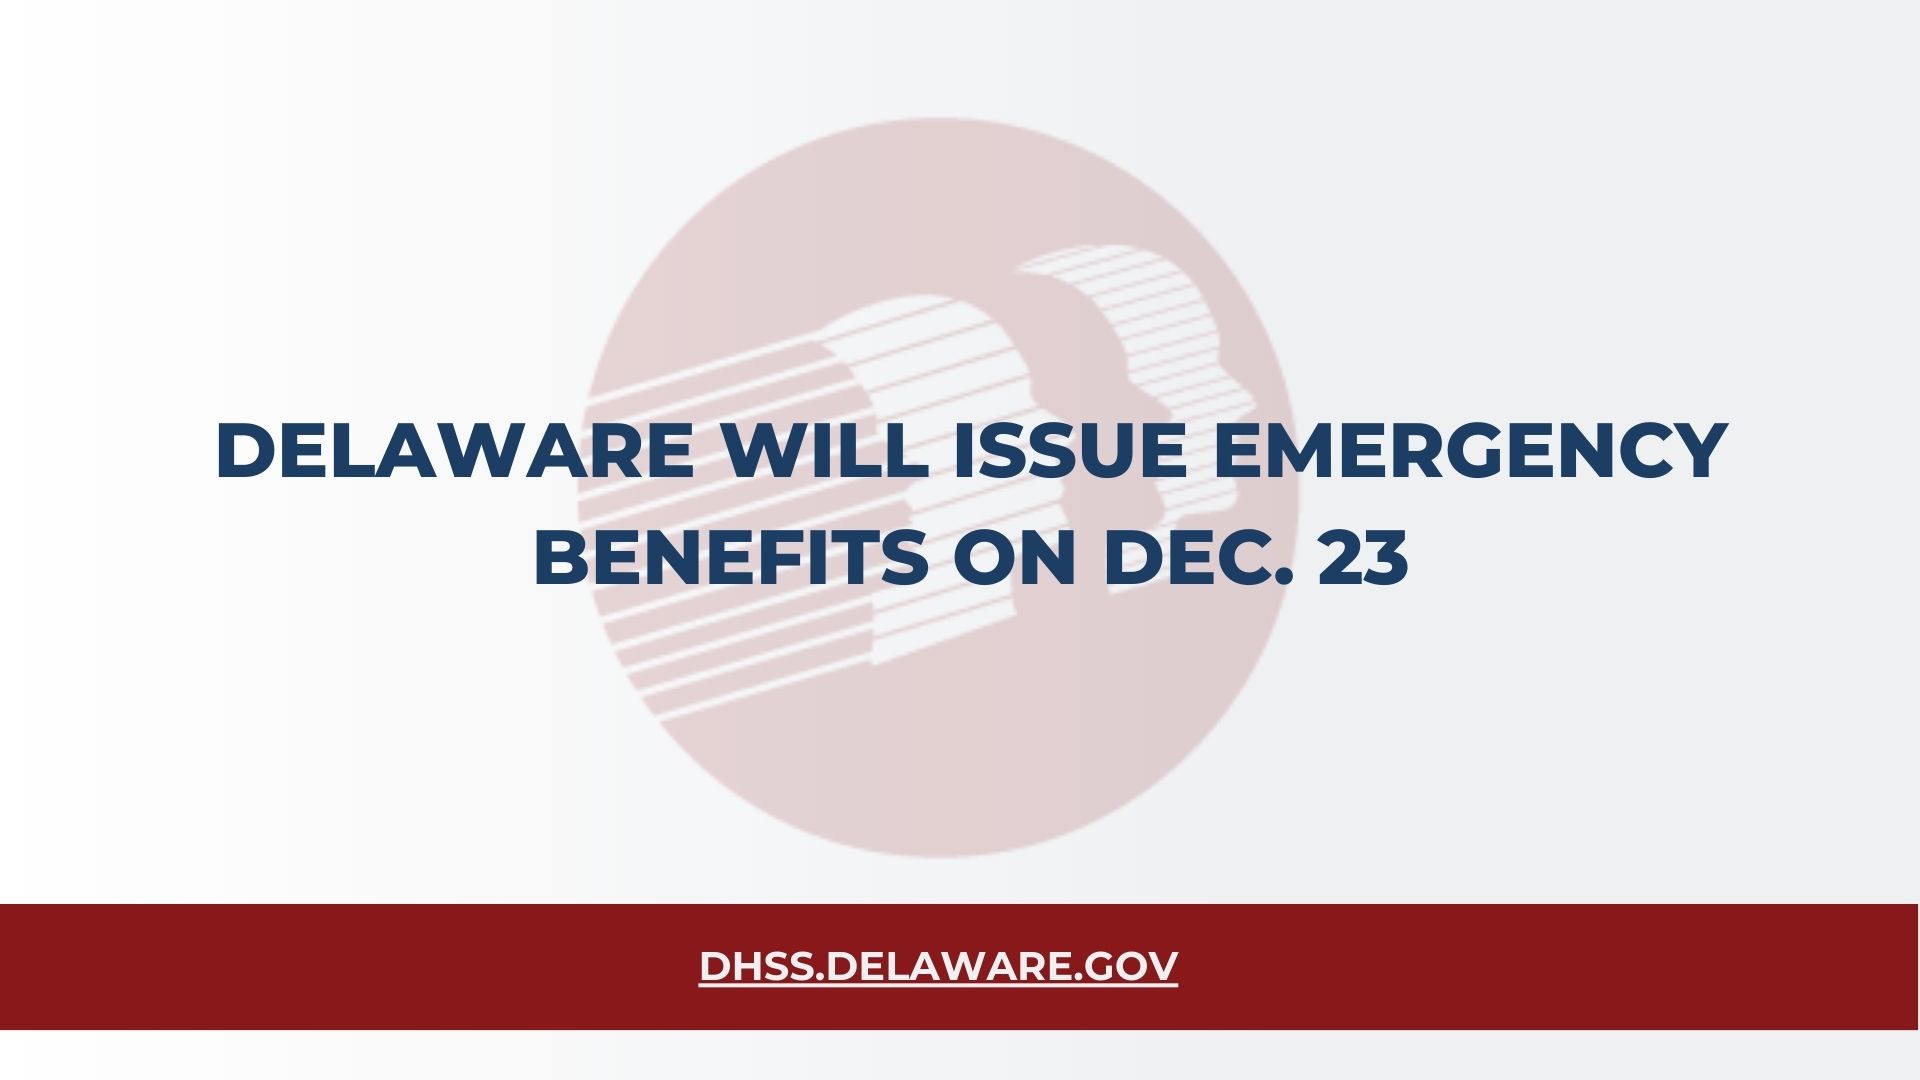 Delaware Will Issue Emergency Benefits on Dec. 23